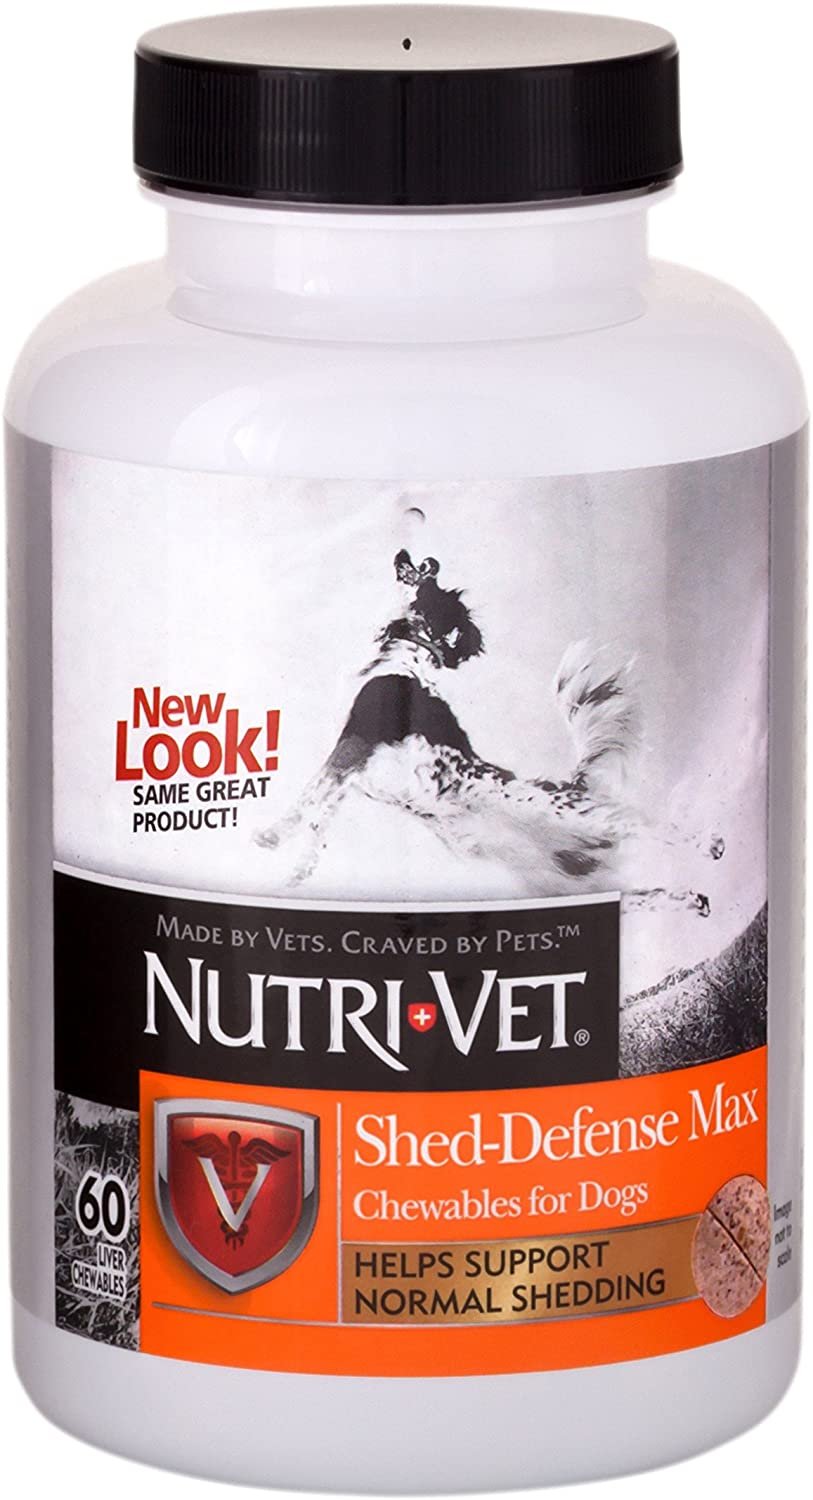 Nutri-Vet Shed-Defense Max Chewables For Dogs, 60 Count | eBay